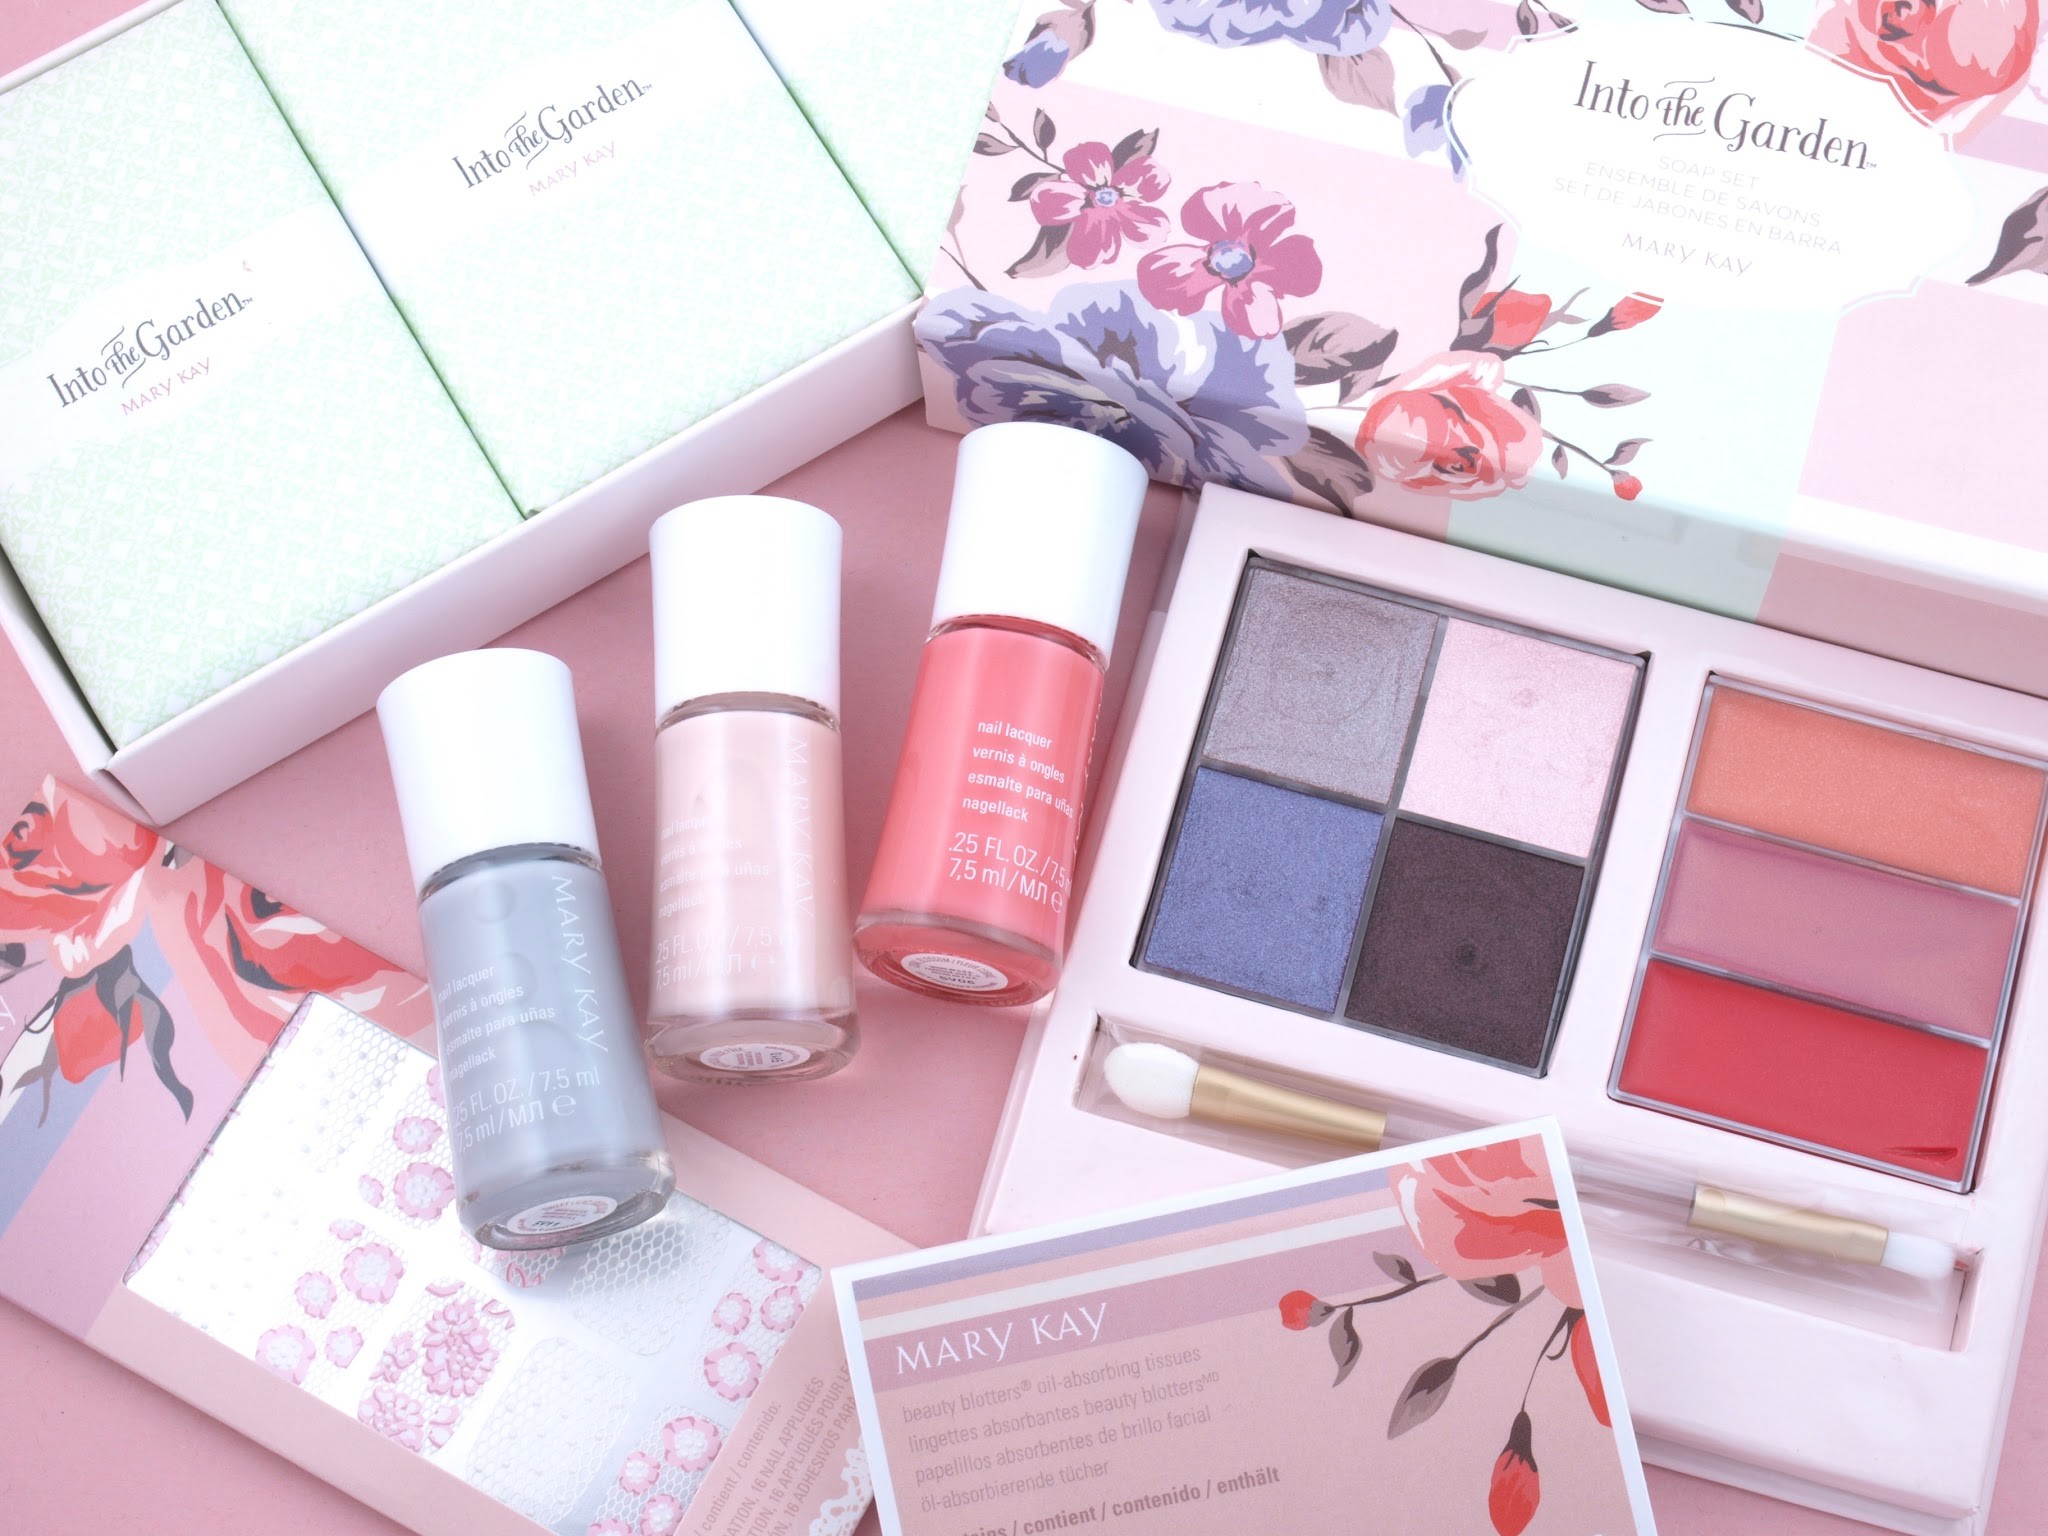 2048x1536 Mary Kay Spring 2016 Into the Garden Collection: Review and Swatches